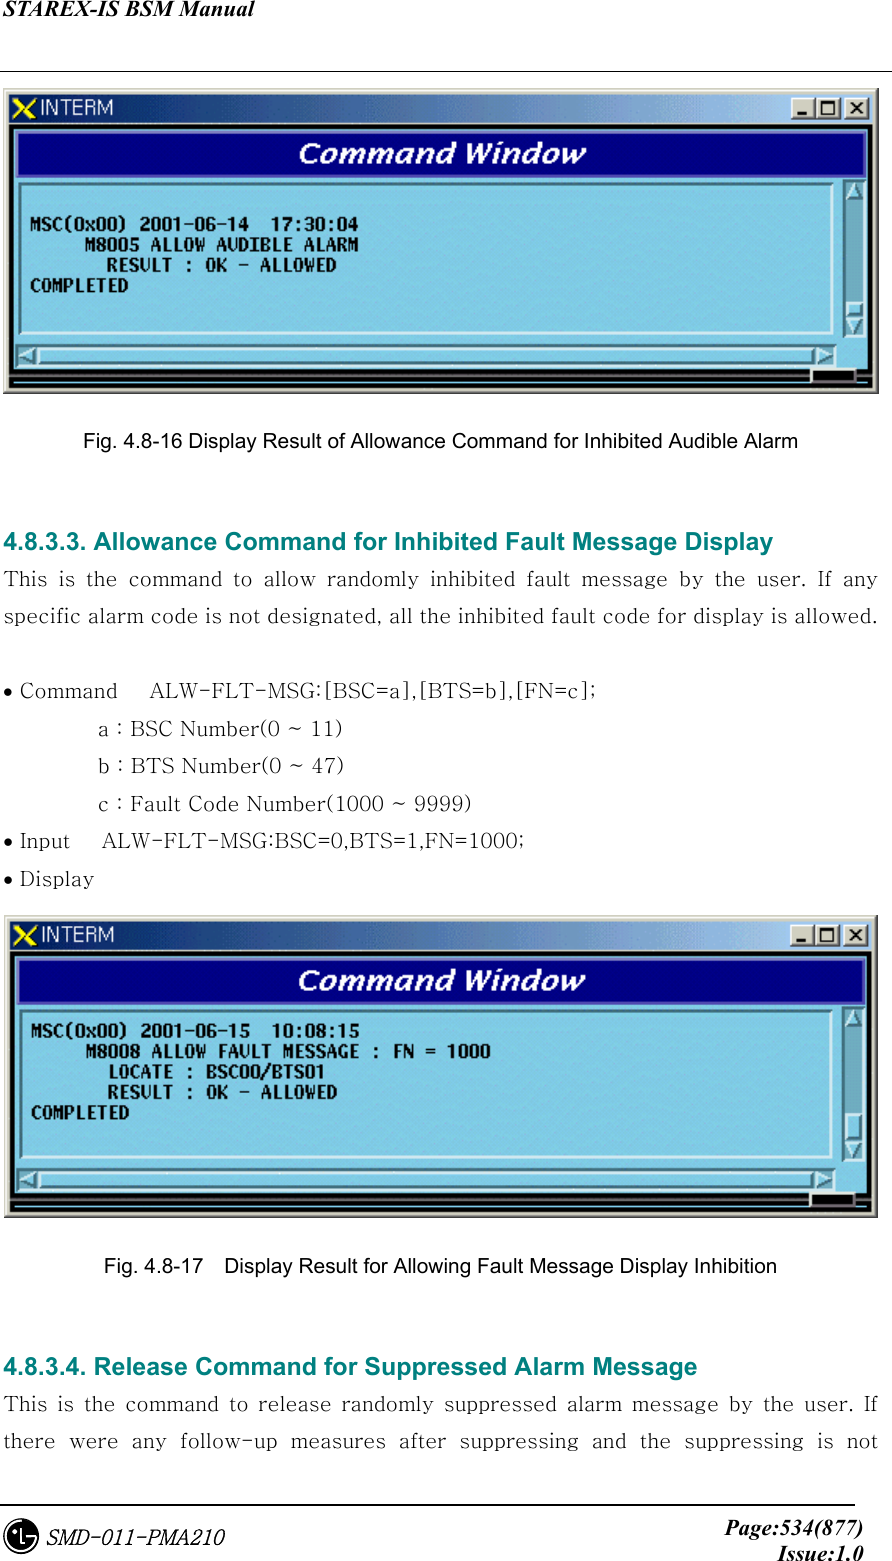 STAREX-IS BSM Manual     Page:534(877)Issue:1.0SMD-011-PMA210  Fig. 4.8-16 Display Result of Allowance Command for Inhibited Audible Alarm  4.8.3.3. Allowance Command for Inhibited Fault Message Display This is the command to allow randomly inhibited fault message by  the  user.  If  any specific alarm code is not designated, all the inhibited fault code for display is allowed.  • Command   ALW-FLT-MSG:[BSC=a],[BTS=b],[FN=c];            a : BSC Number(0 ~ 11)          b : BTS Number(0 ~ 47)          c : Fault Code Number(1000 ~ 9999) • Input   ALW-FLT-MSG:BSC=0,BTS=1,FN=1000; • Display    Fig. 4.8-17    Display Result for Allowing Fault Message Display Inhibition  4.8.3.4. Release Command for Suppressed Alarm Message This  is  the  command  to  release  randomly  suppressed  alarm  message  by  the  user.  If there were any follow-up measures after suppressing and the suppressing  is  not 